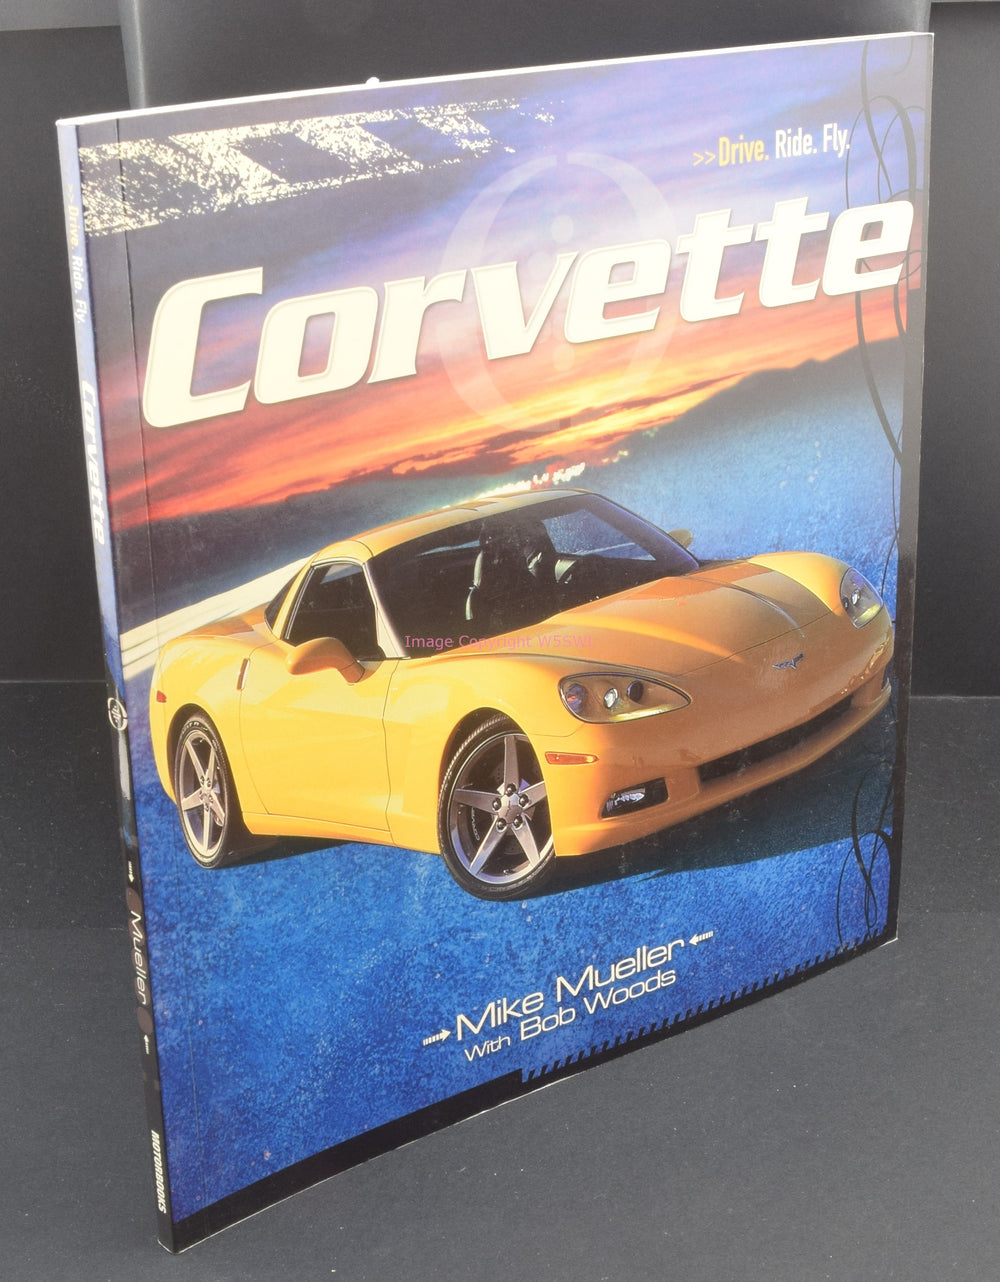 Corvette Drive Ride Fly by Mike Mueller - Dave's Hobby Shop by W5SWL